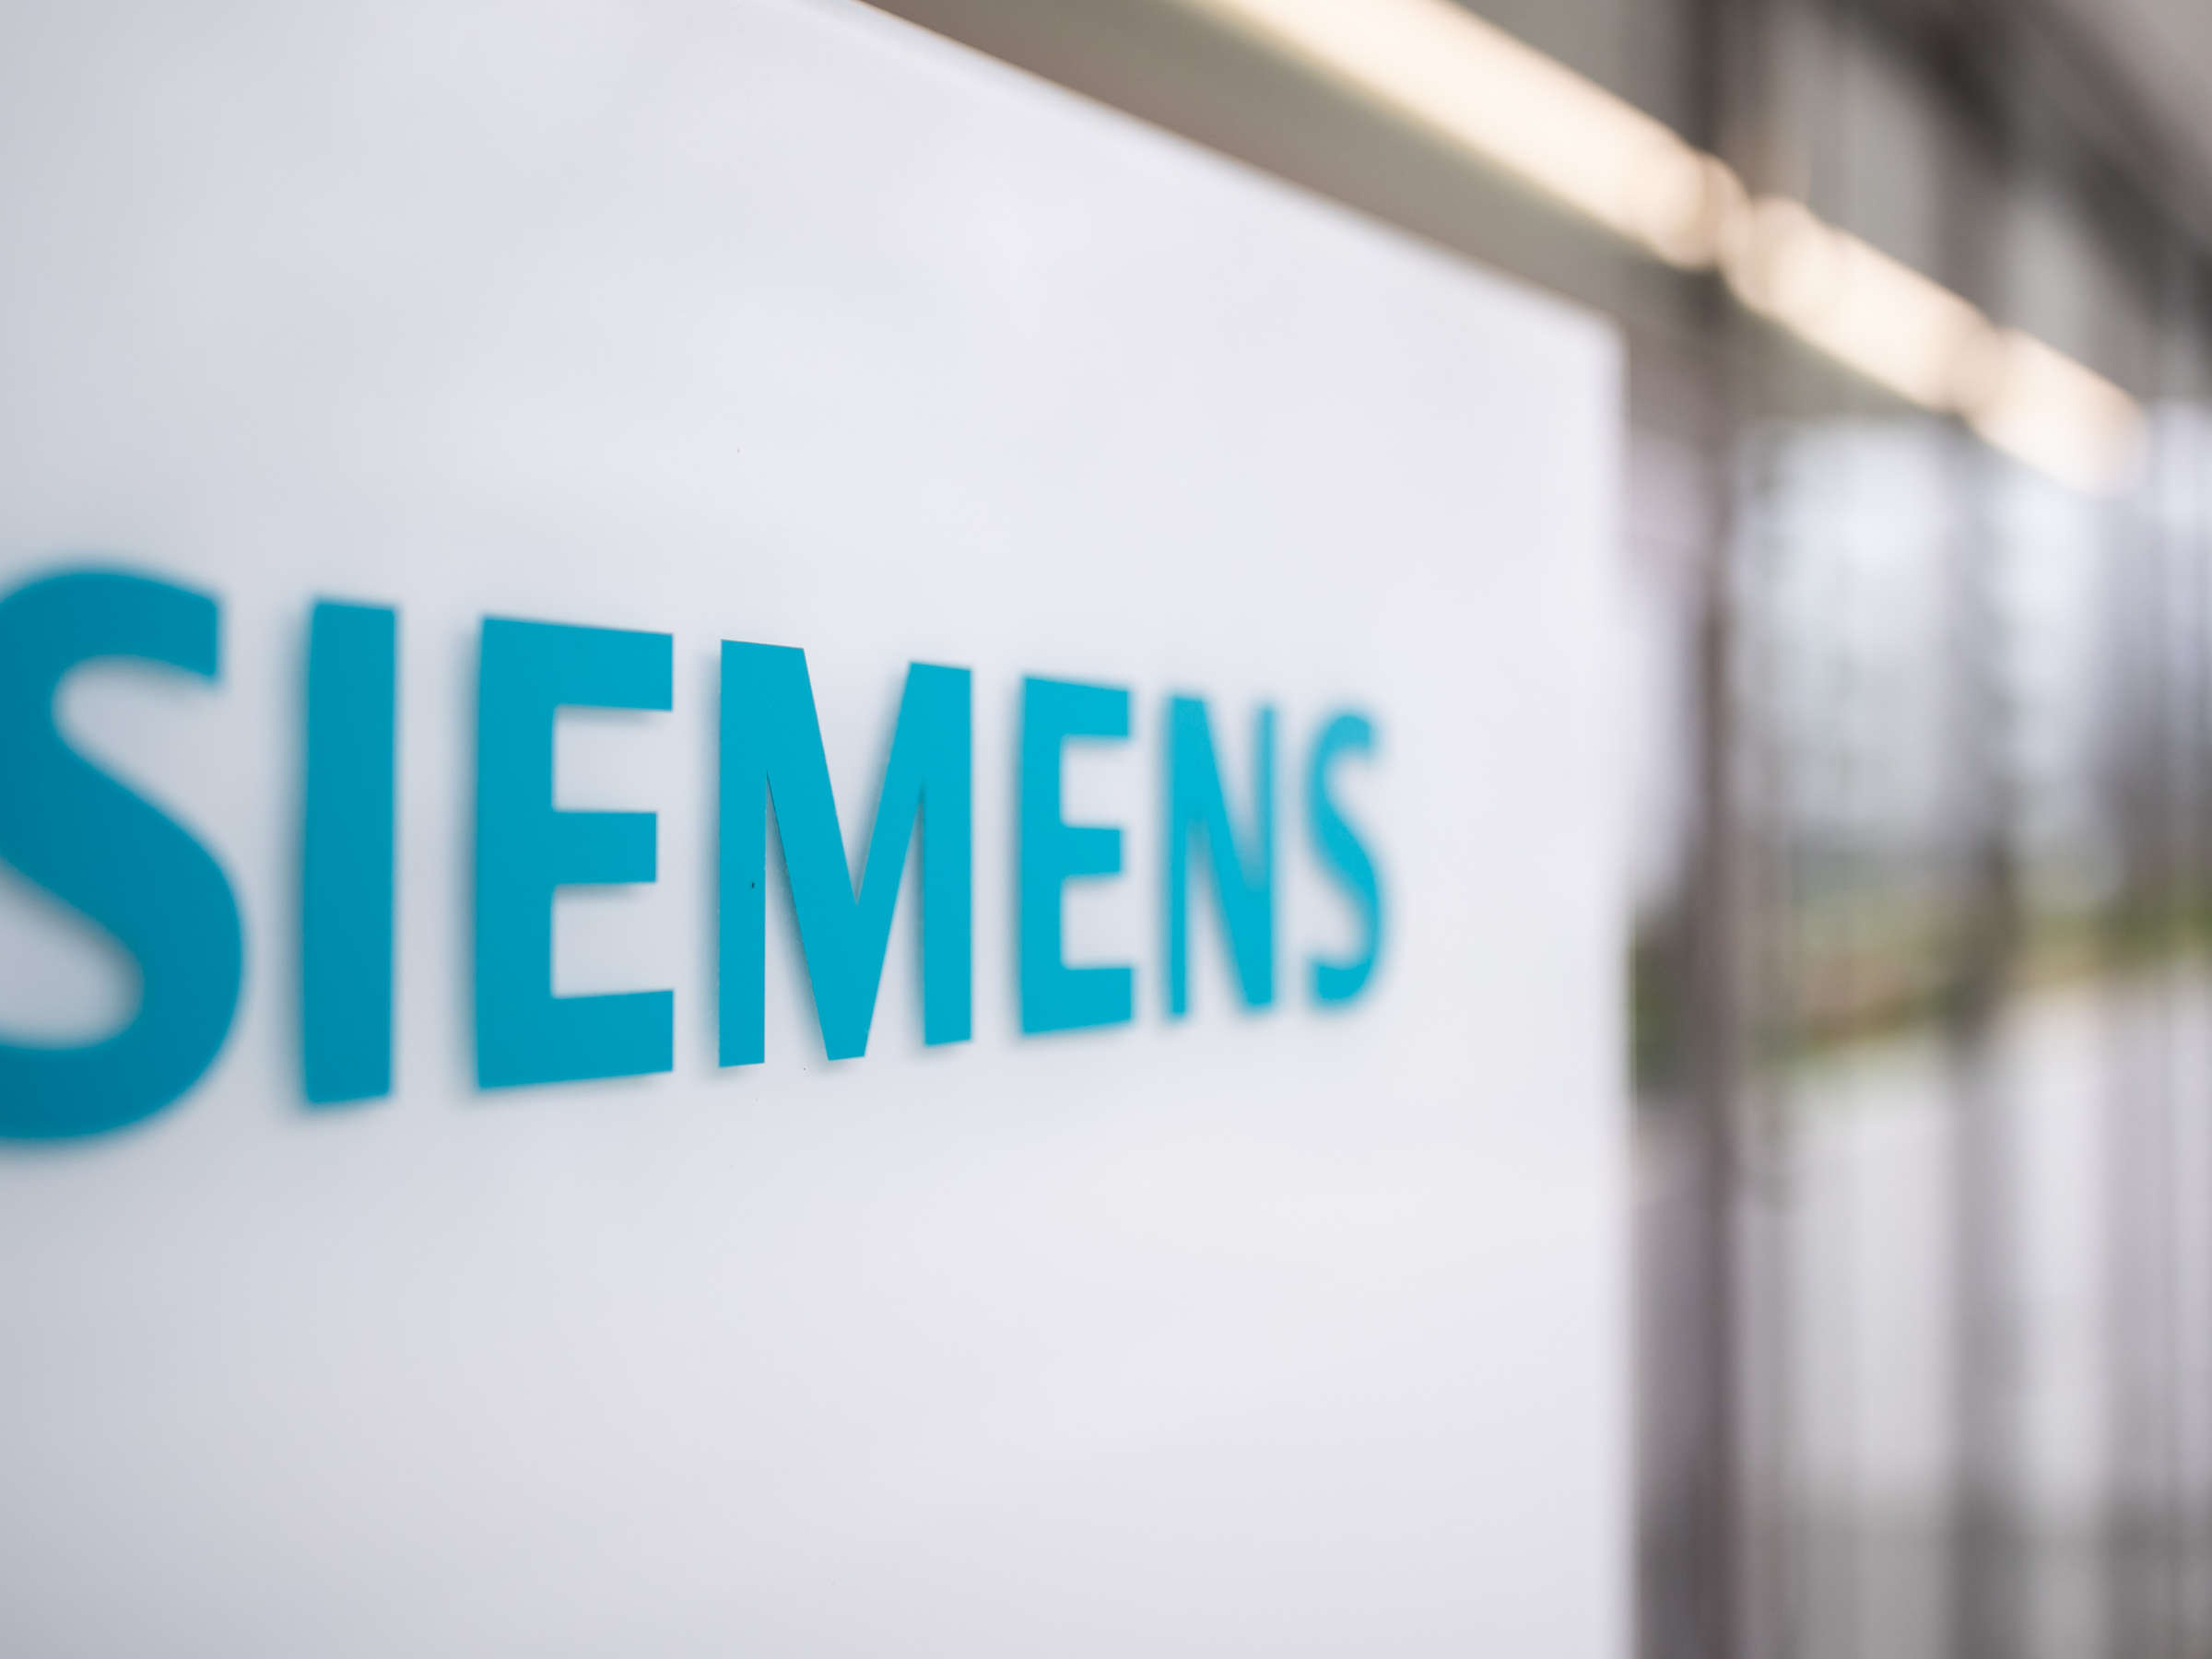 Siemens: German energy technology and manufacturing company formed in 1966 through the merger of Siemens and Halske AG. 2400x1800 HD Wallpaper.